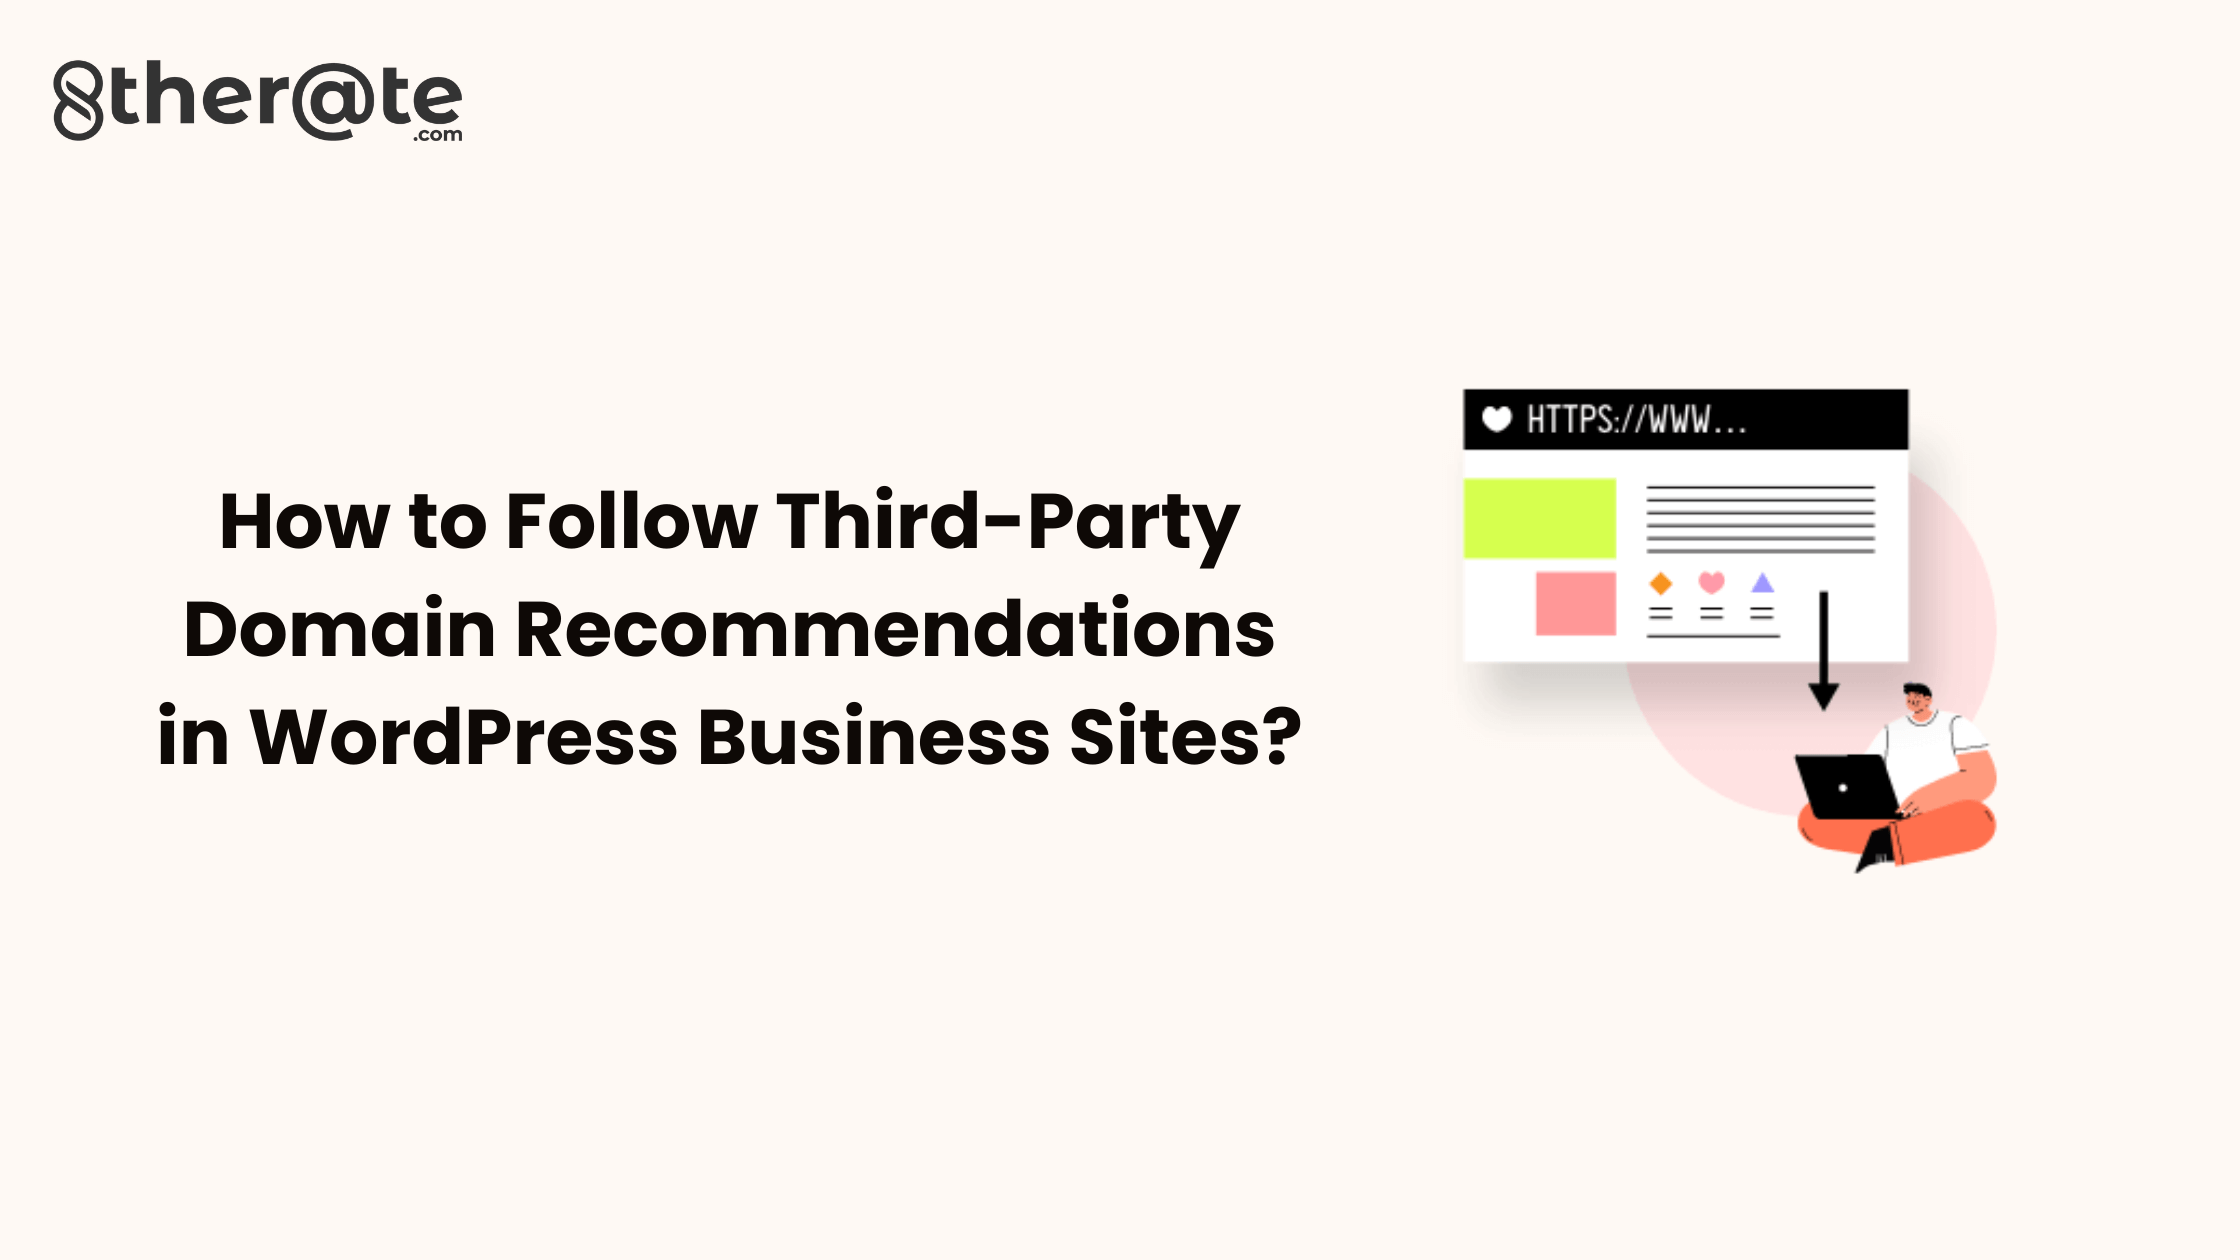 How to Follow Third-Party Domain Recommendations in WordPress Business Sites?